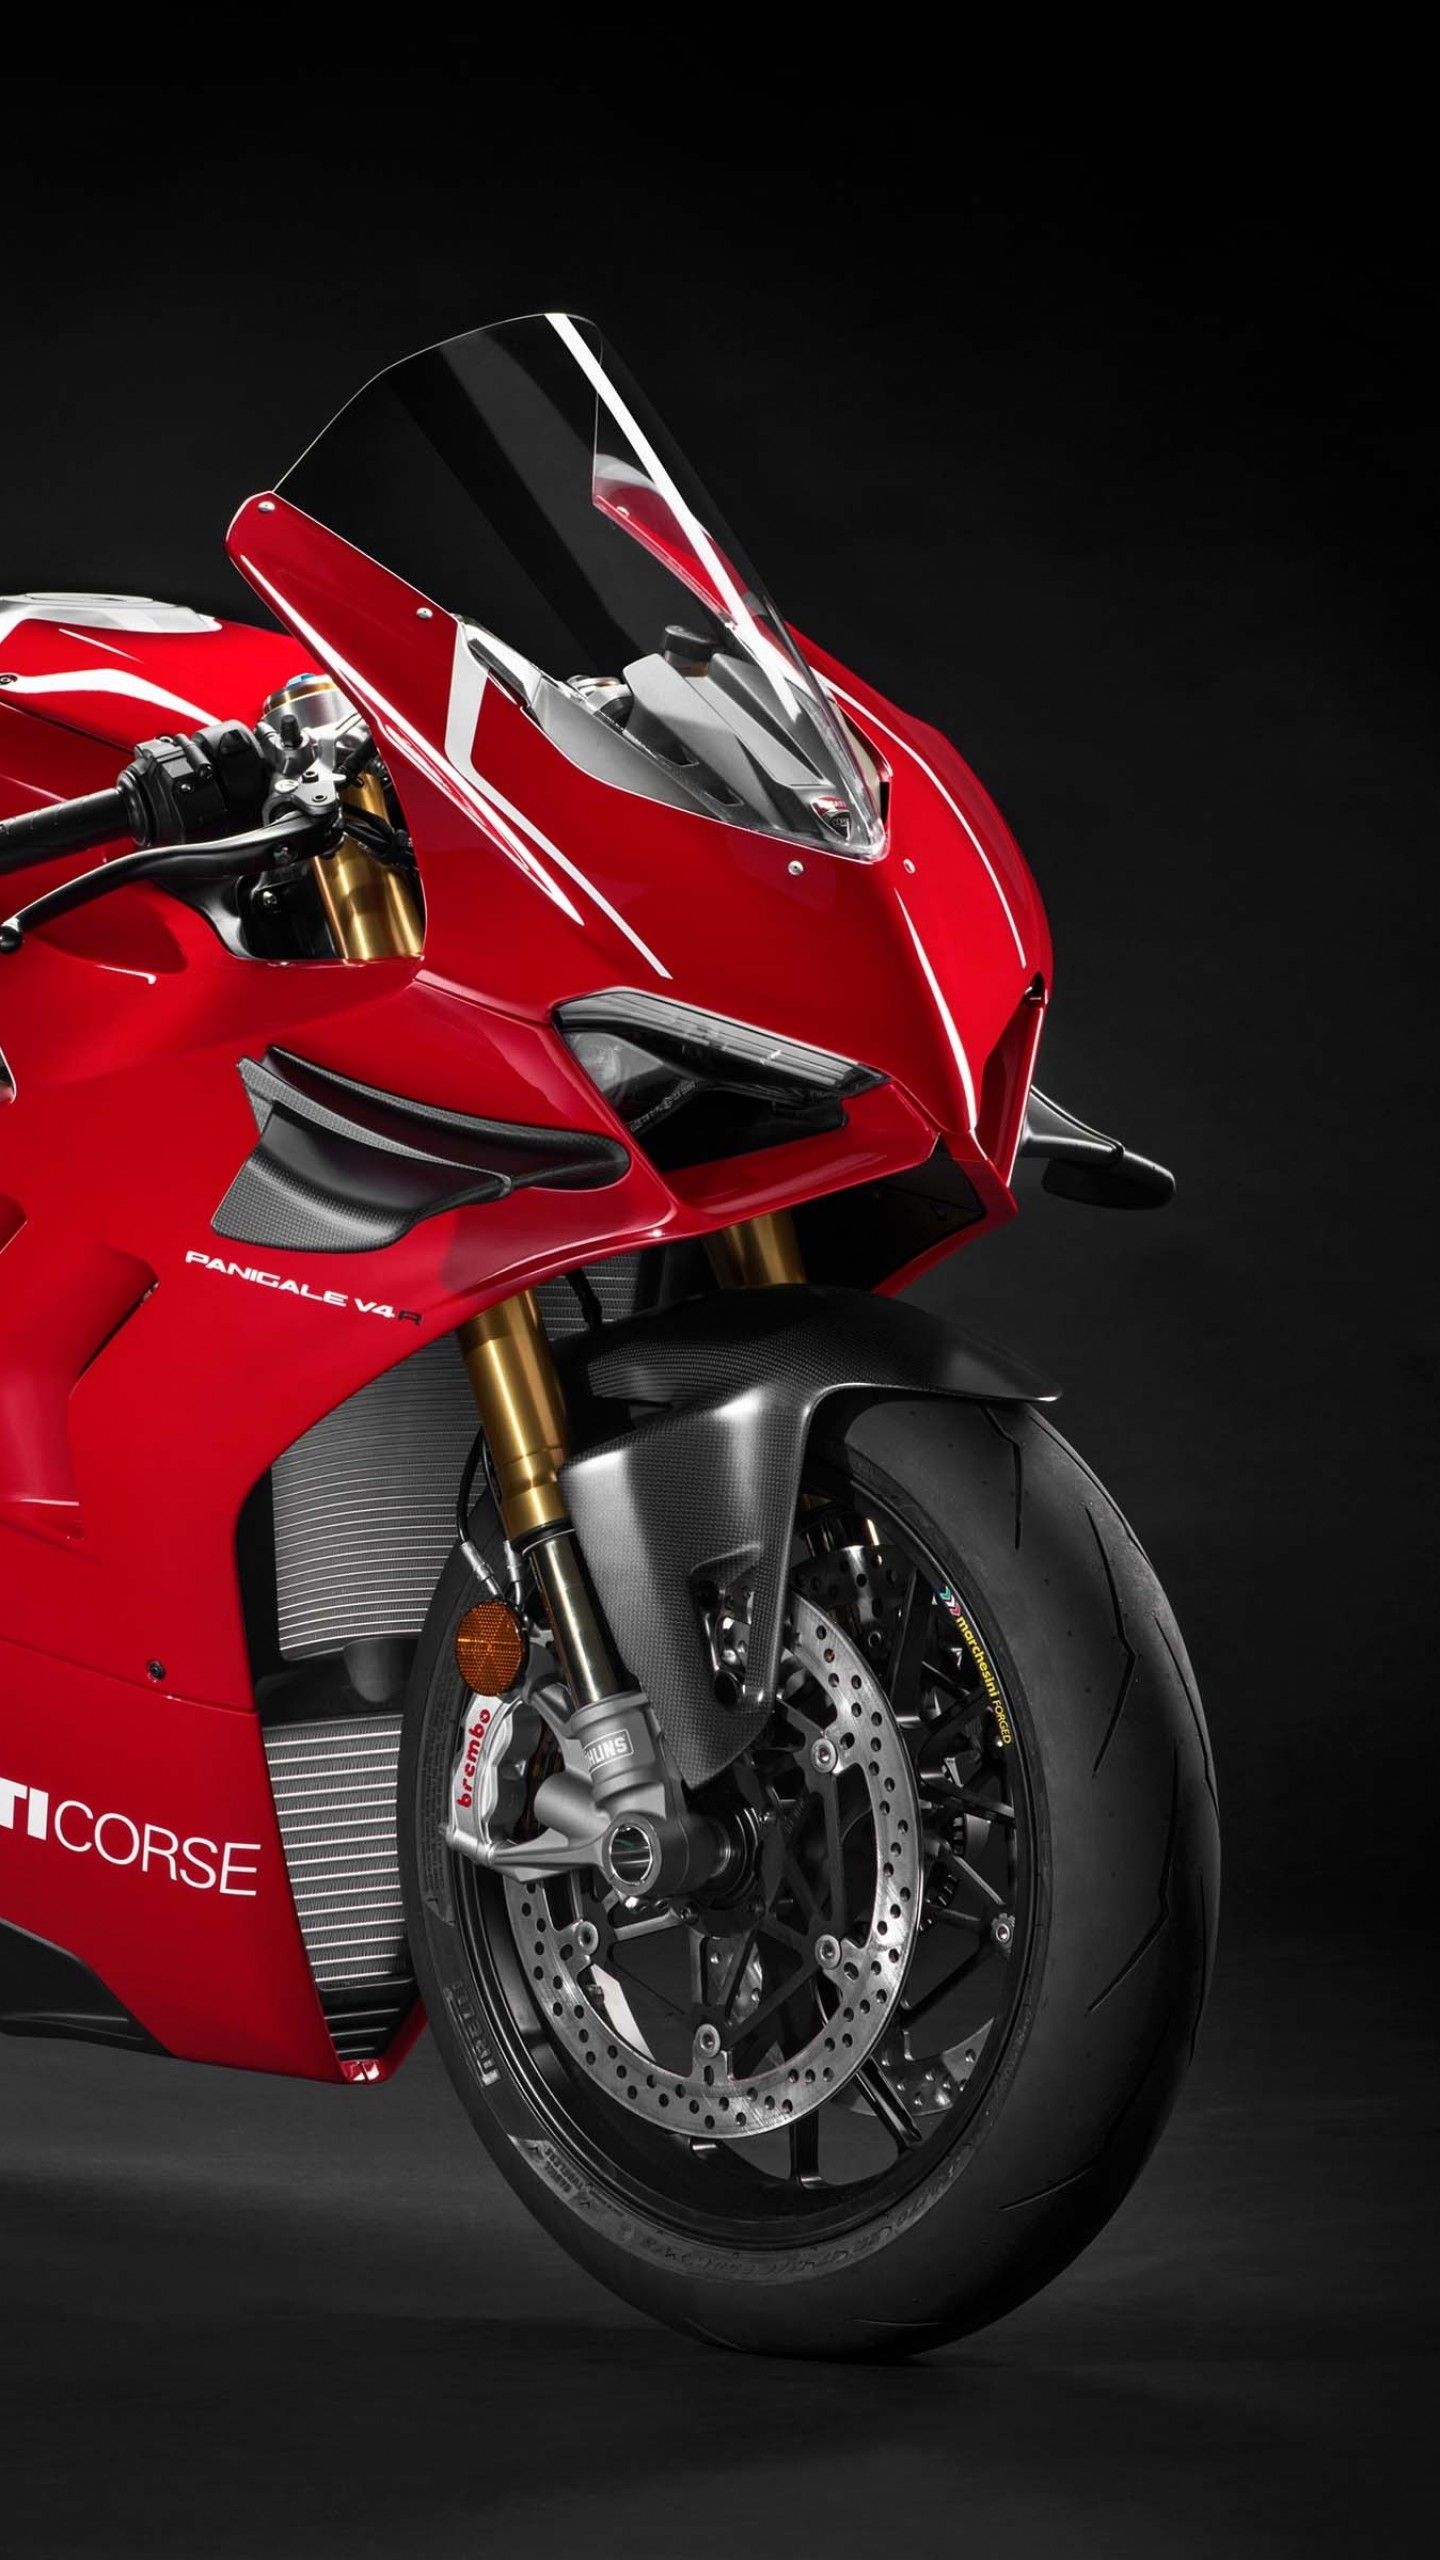 Wallpaper Ducati Panigale V4 R, 4K, Automotive / Bikes,. Wallpaper for iPhone, Android, Mobile and Desktop